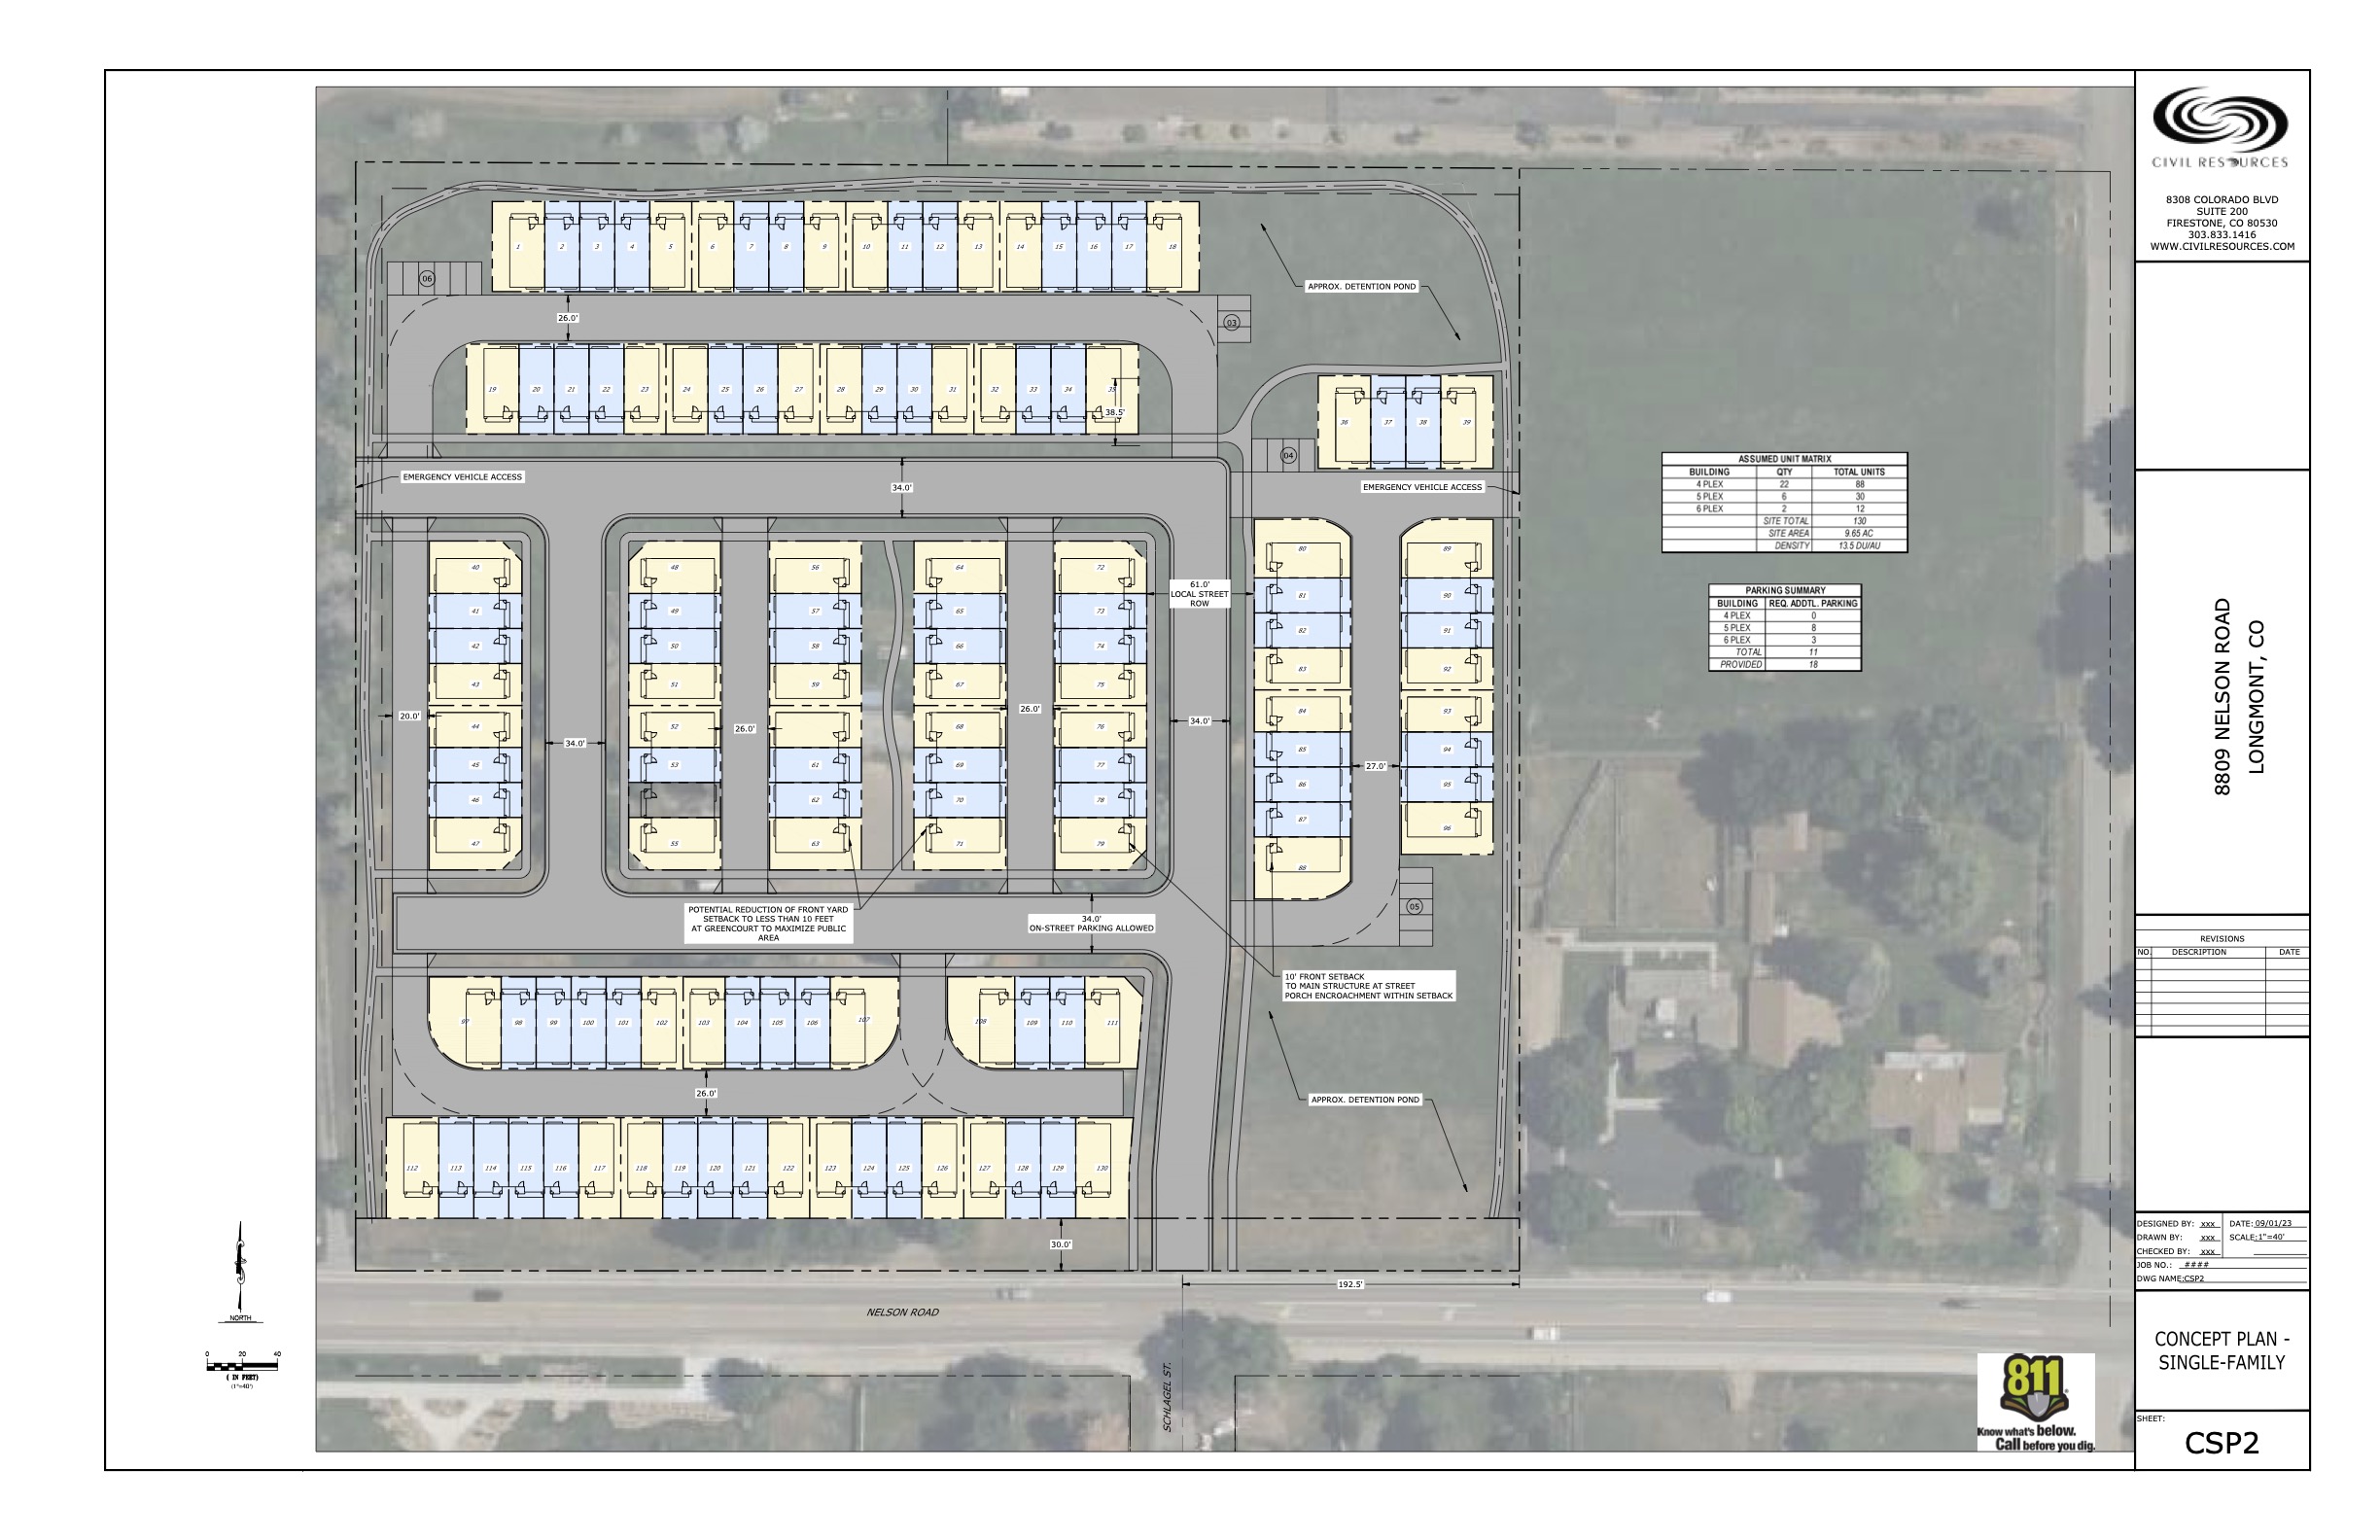 New Residential Project in Longmont Begins Annexation Process